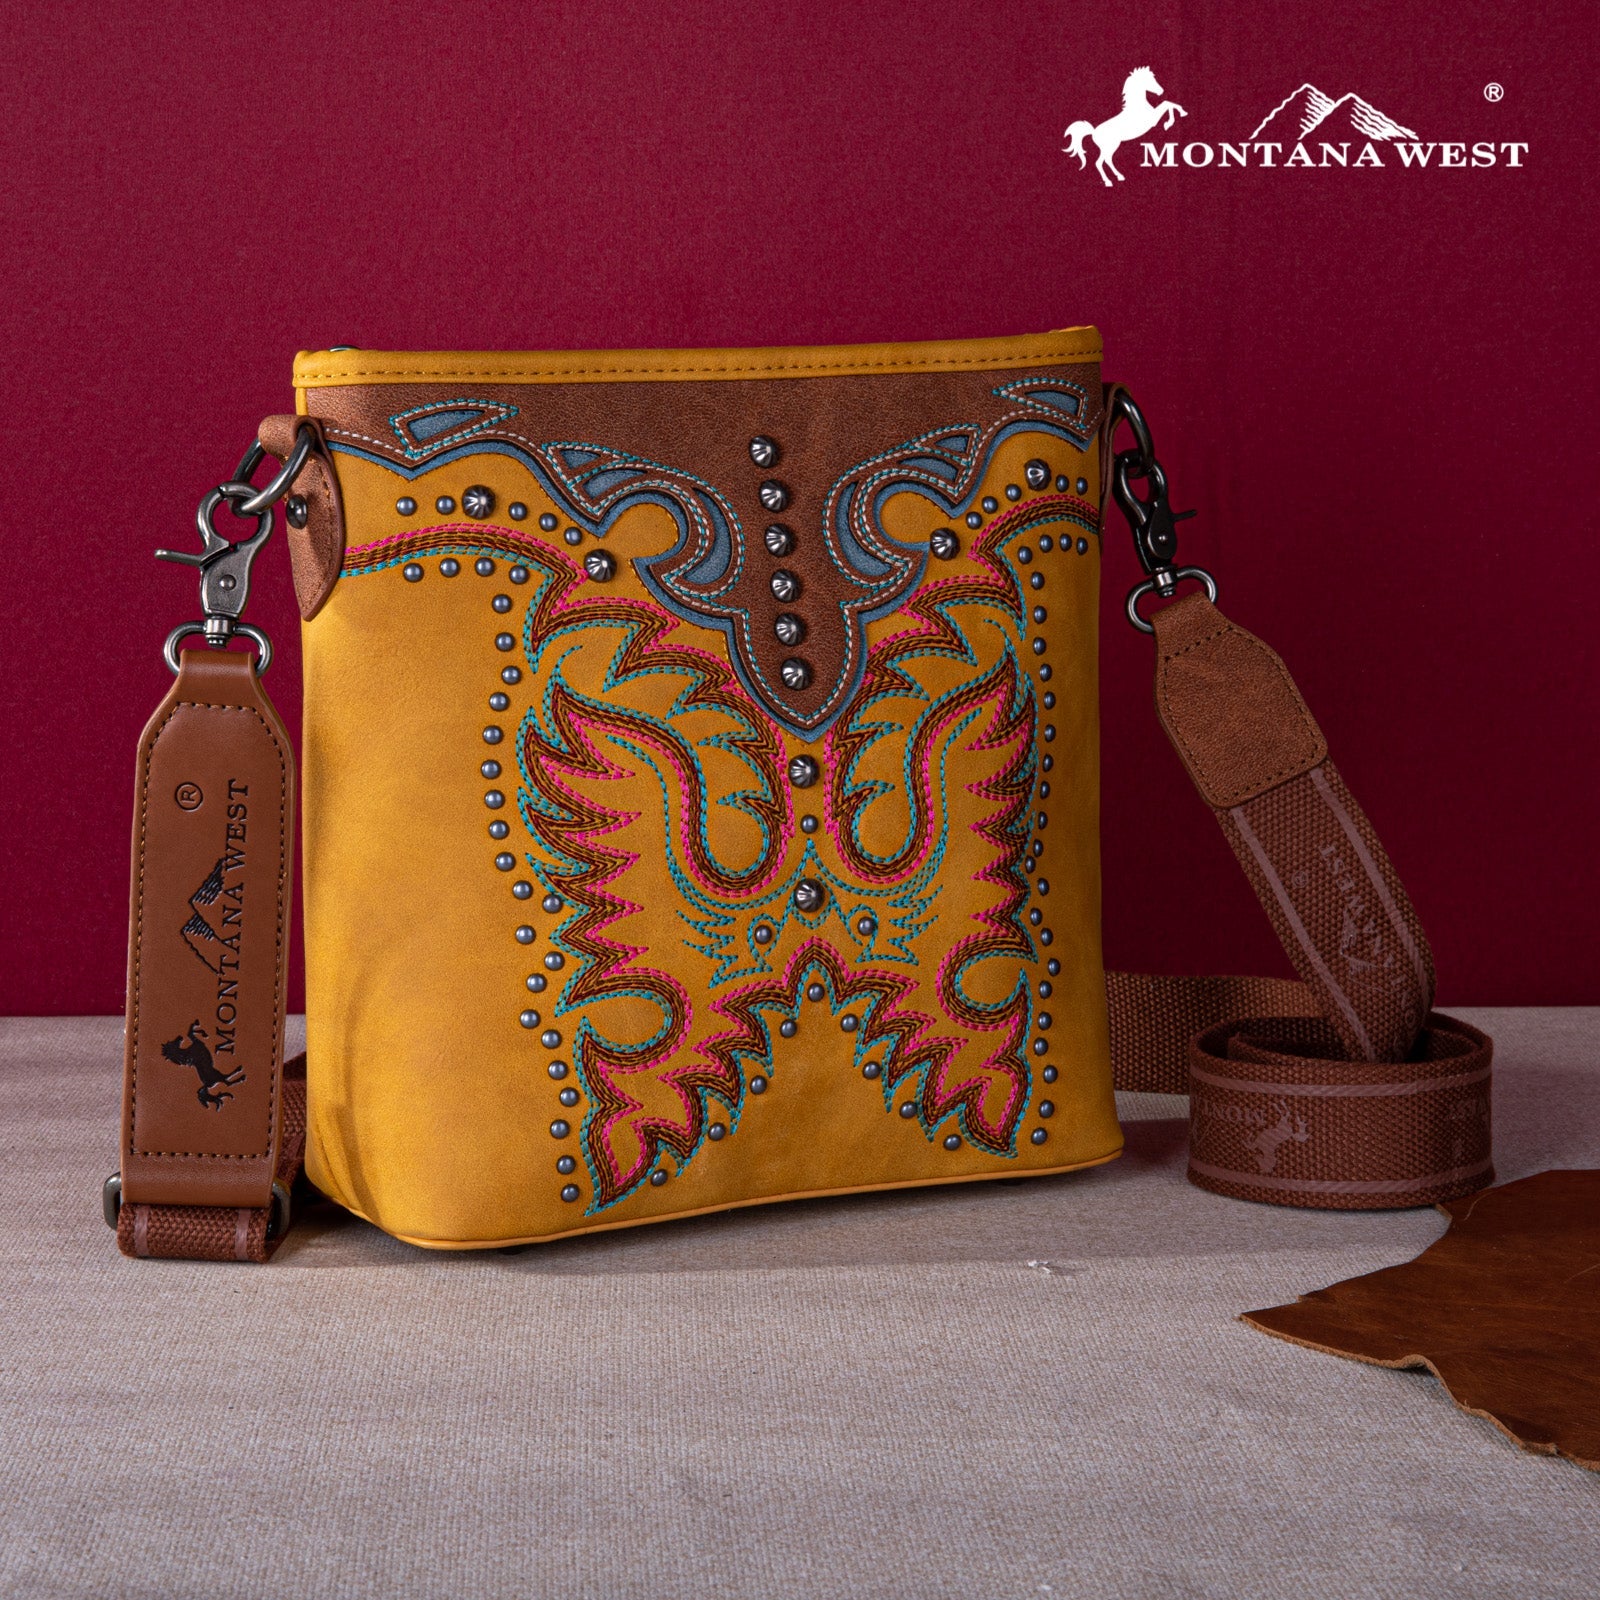 Montana West Embroidered Concealed Carry Crossbody Bag - Montana West World